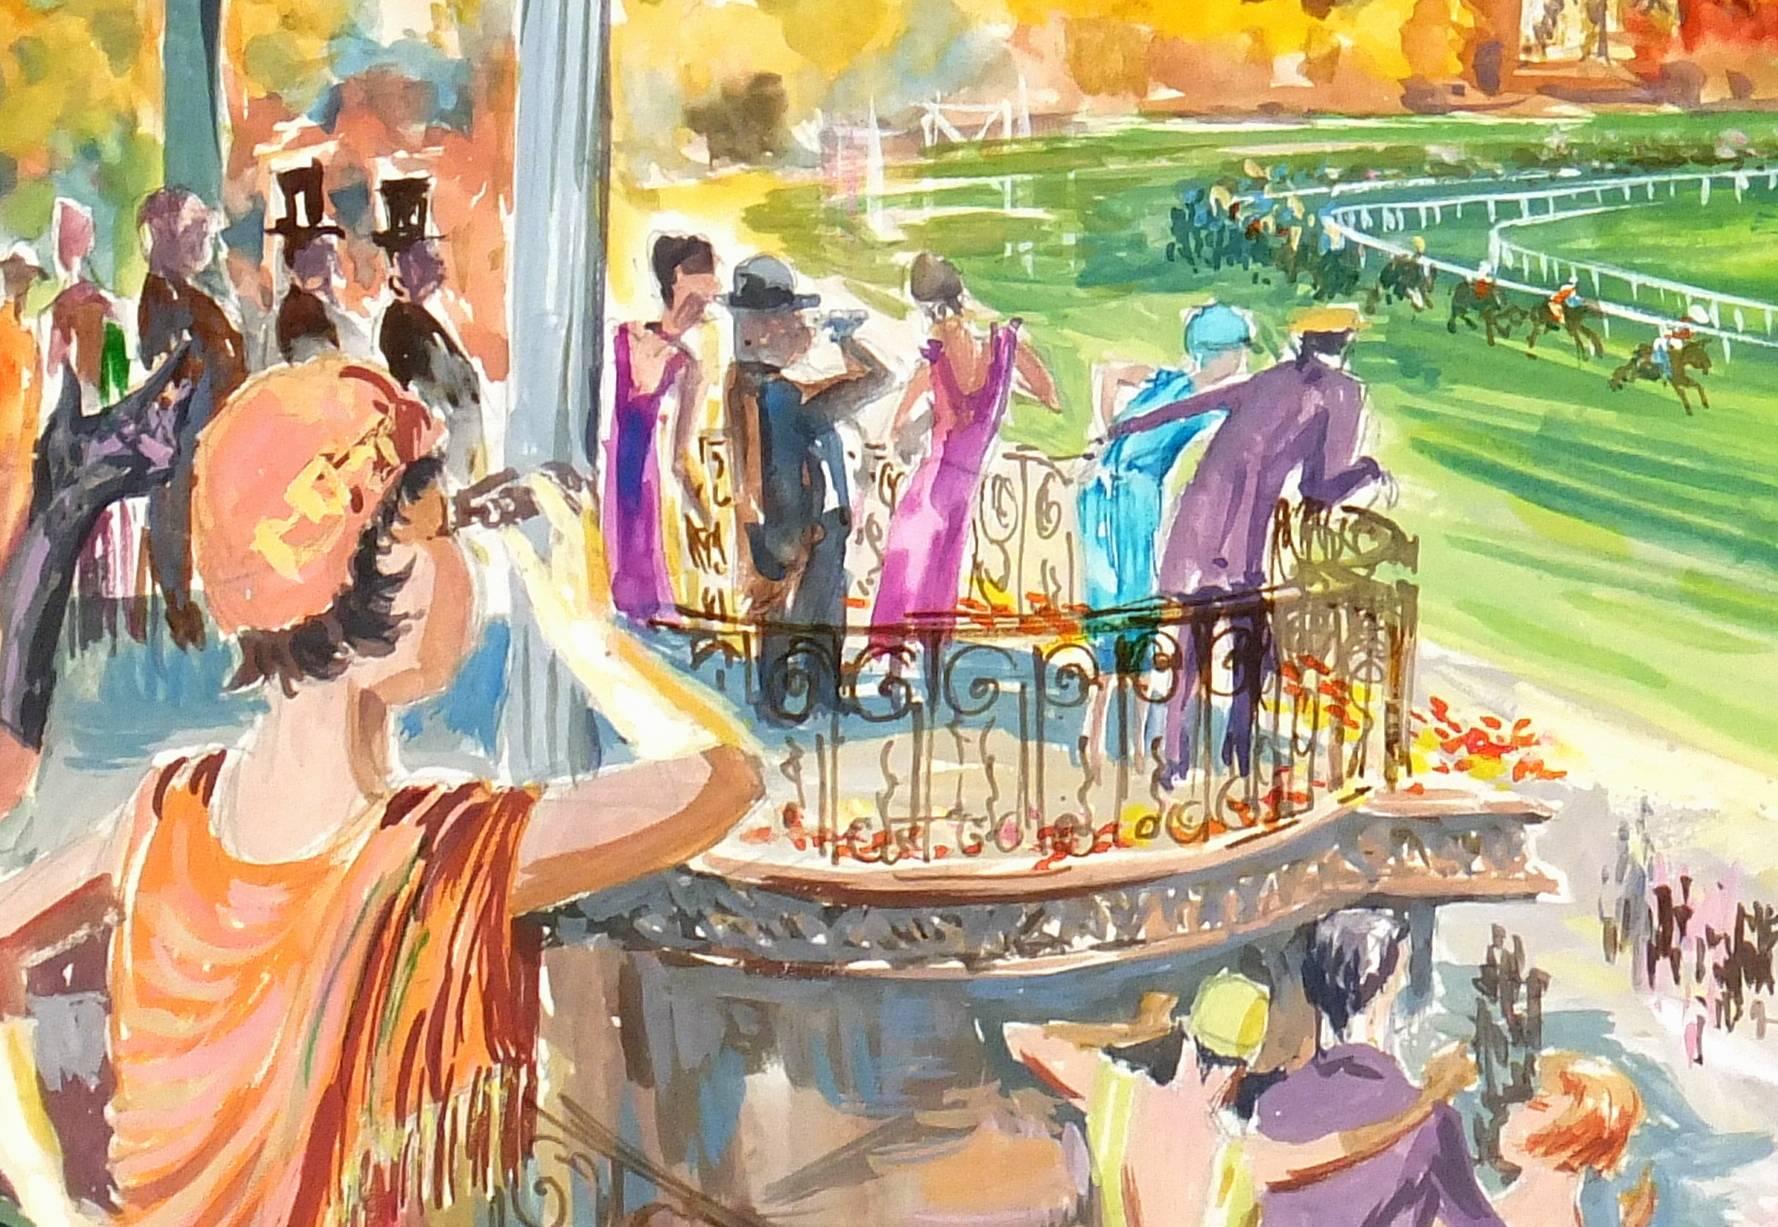 At the Races - Art by Unknown